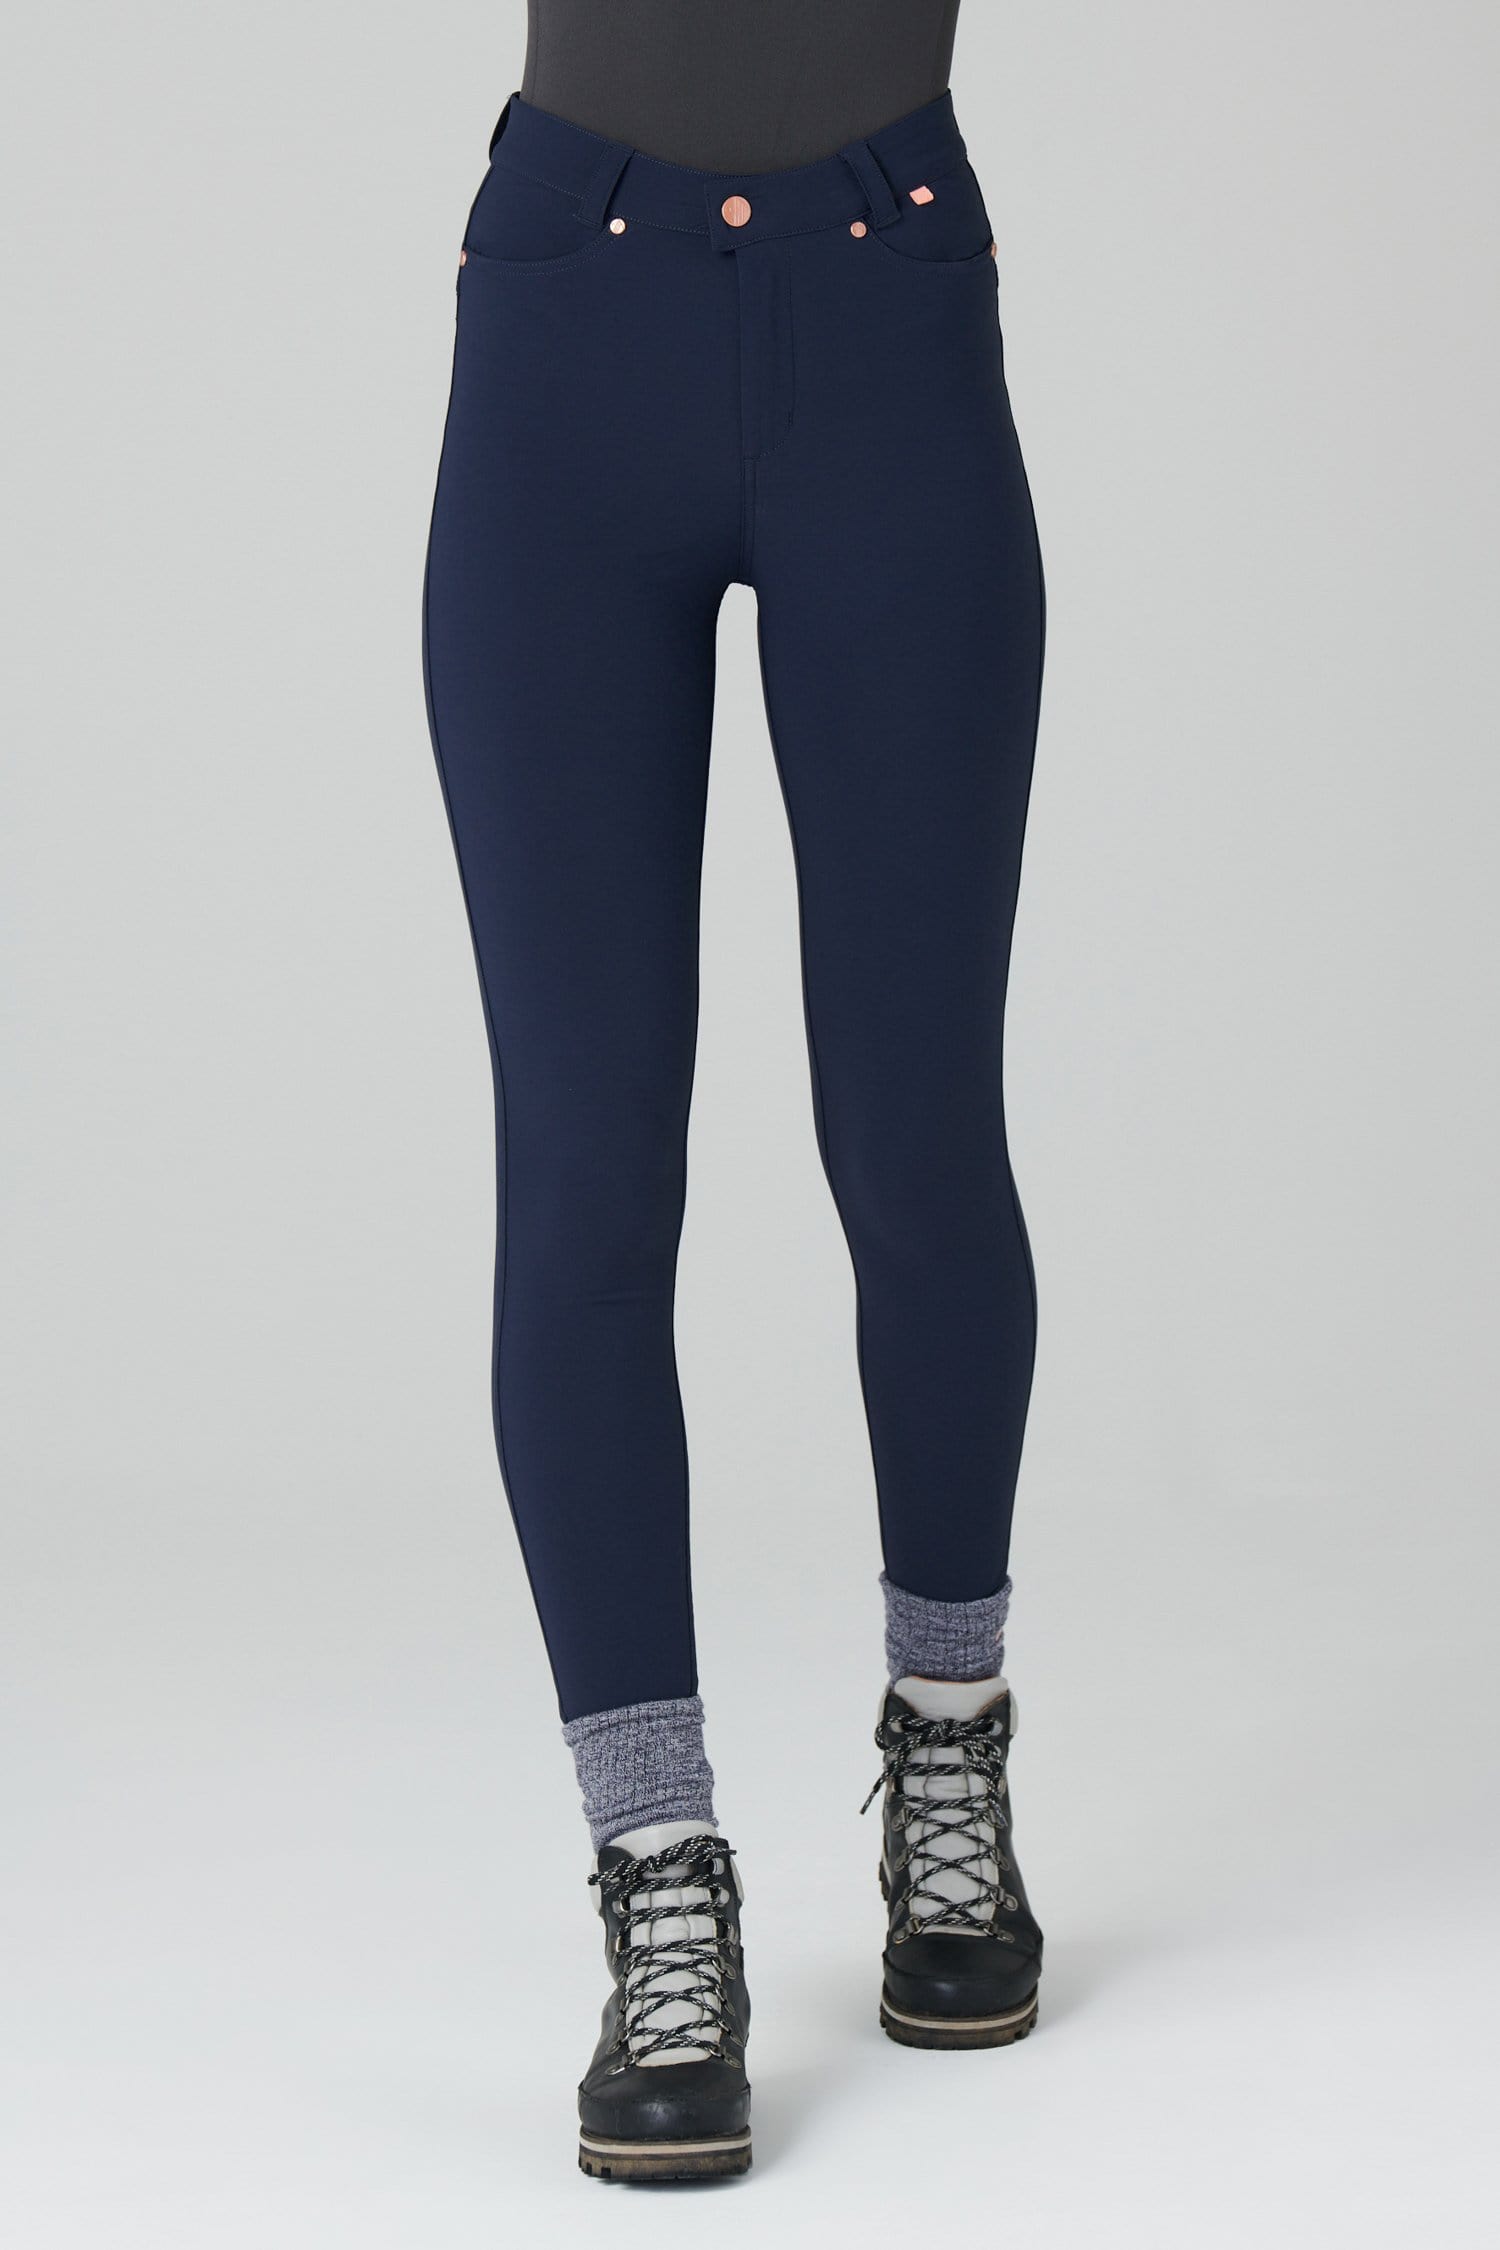 Max Stretch Skinny Outdoor Trousers - Deep Navy - 26xl / Uk8 - Womens - Acai Outdoorwear